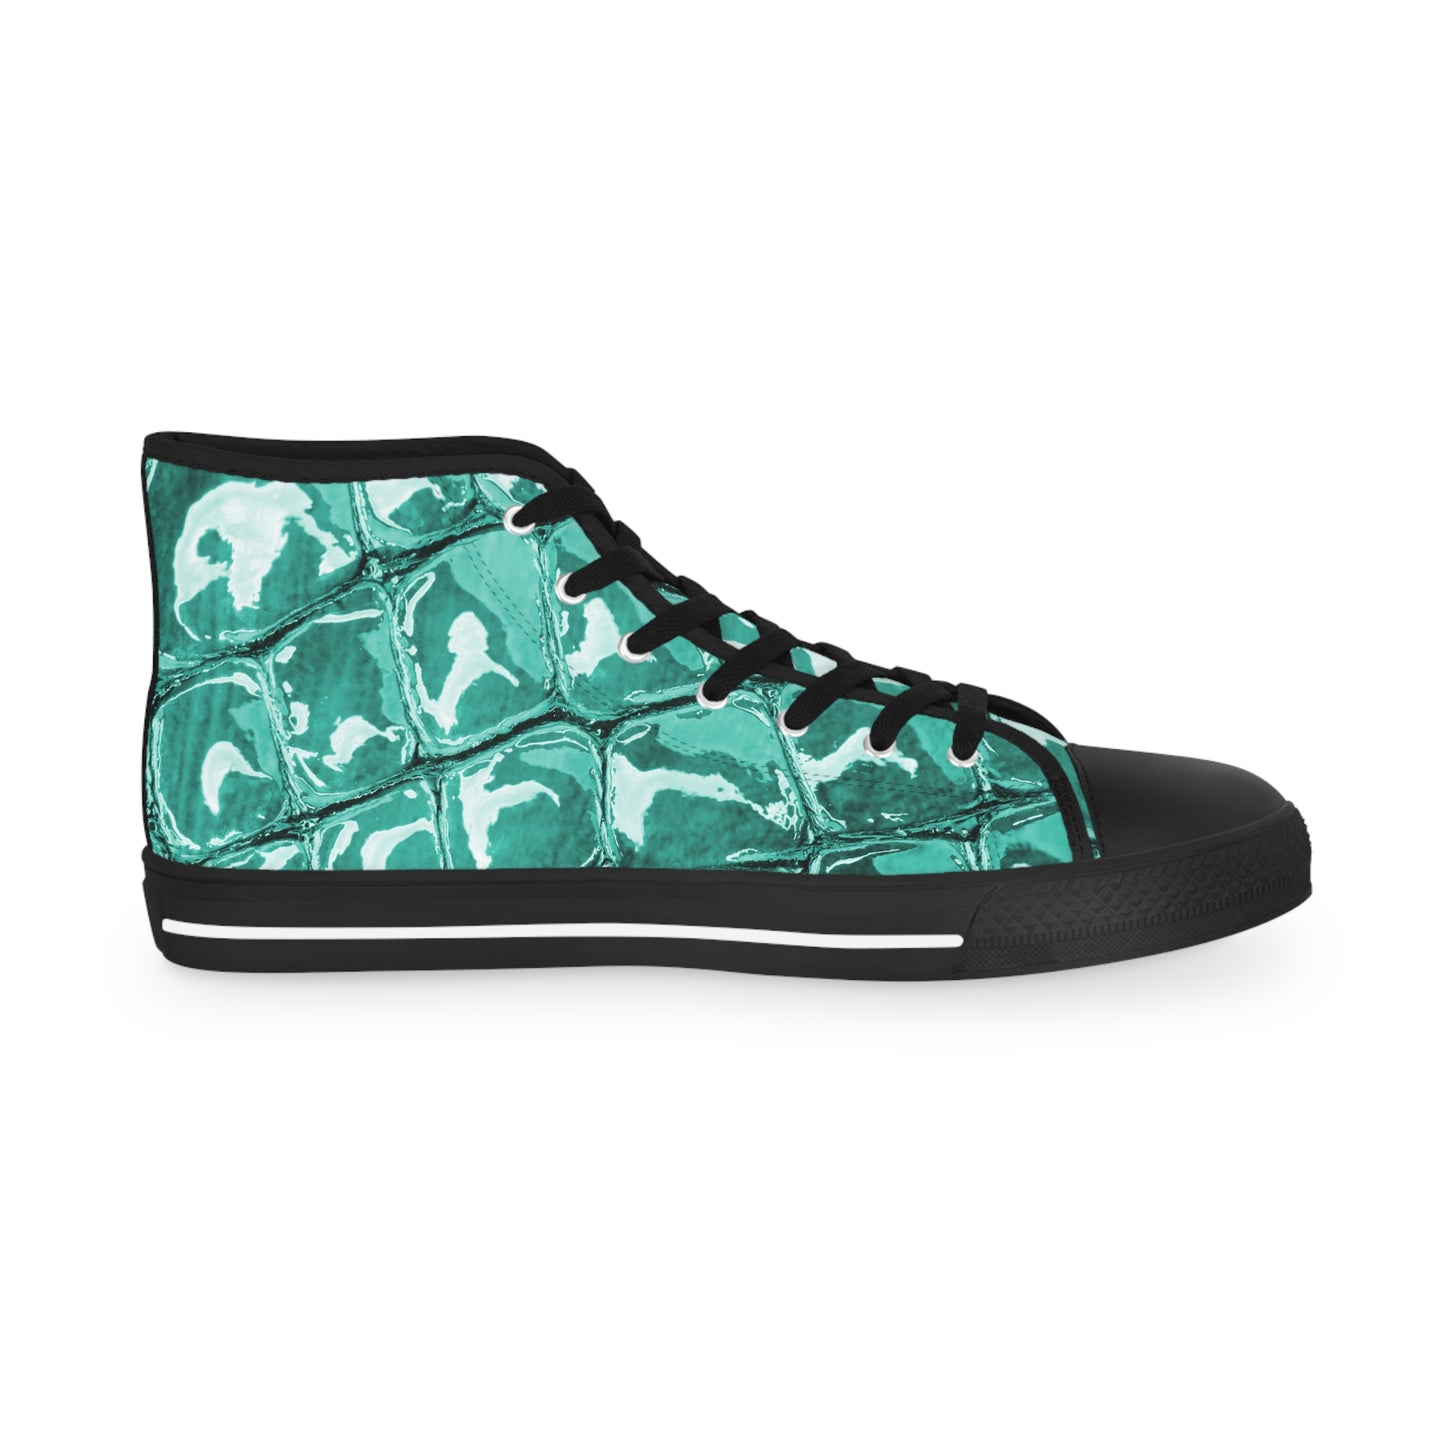 Limited Edition High Top Sneakers - Cold Blood